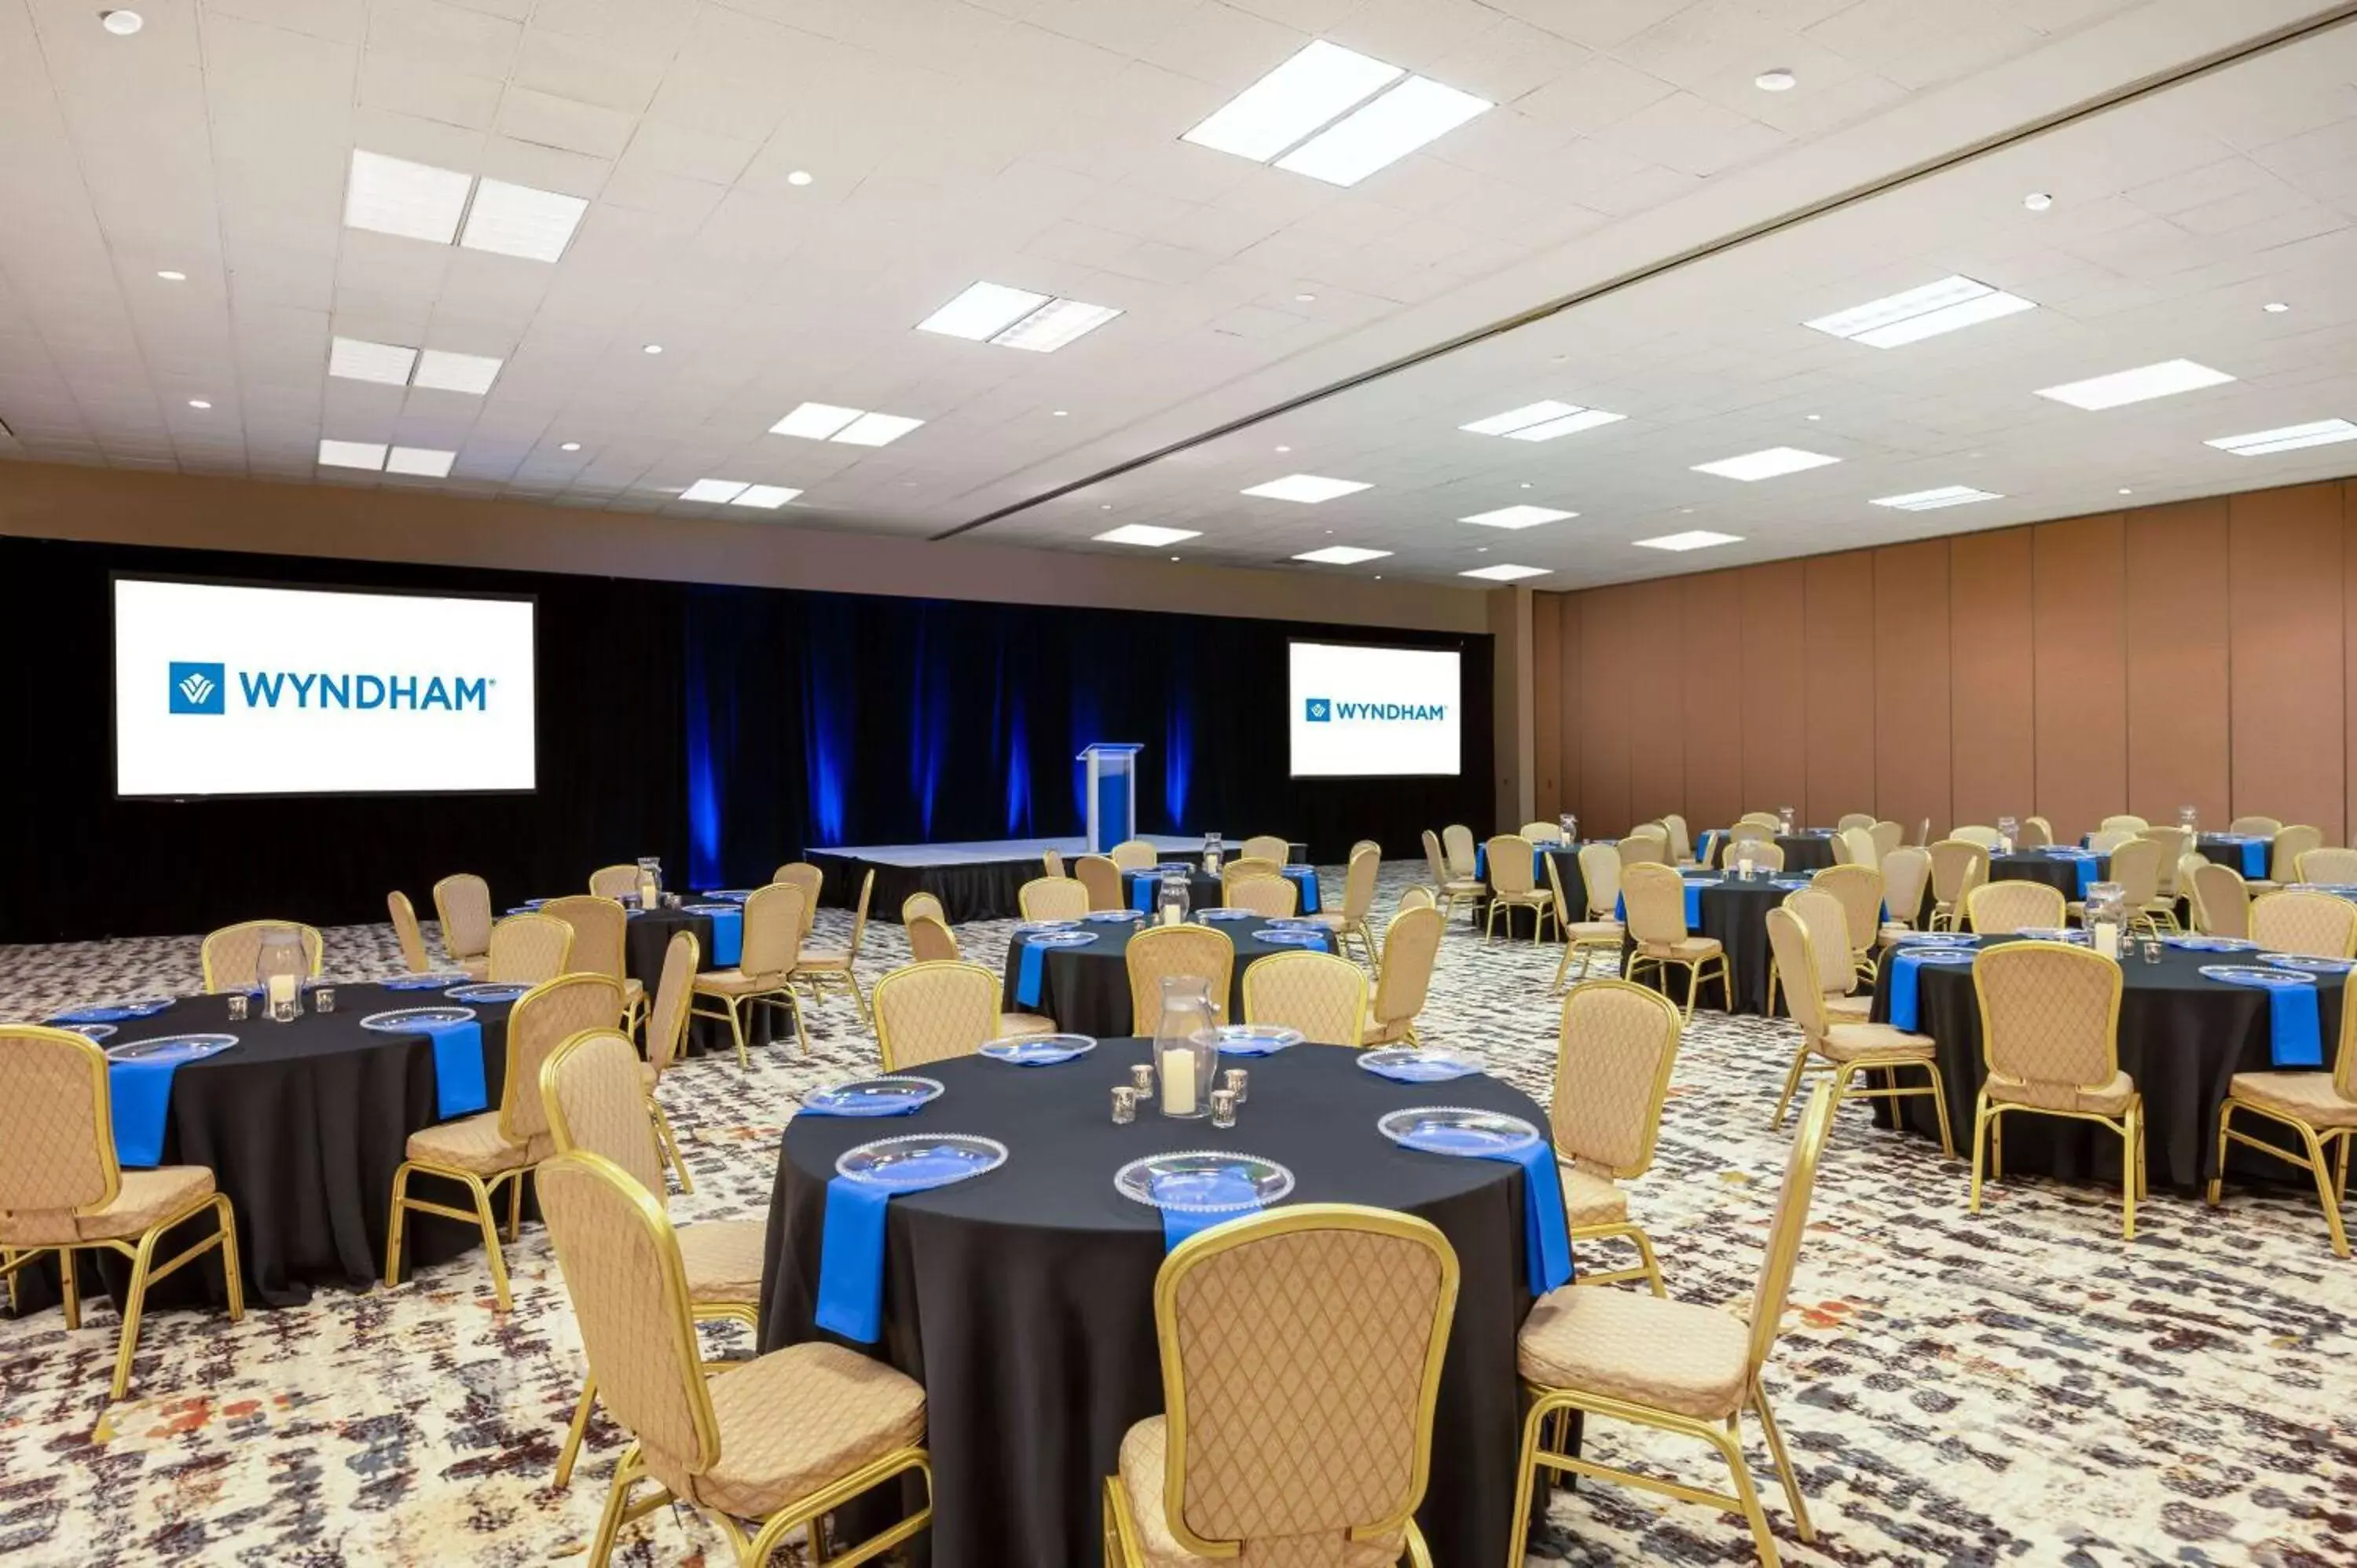 Meeting/conference room in Wyndham Indianapolis West